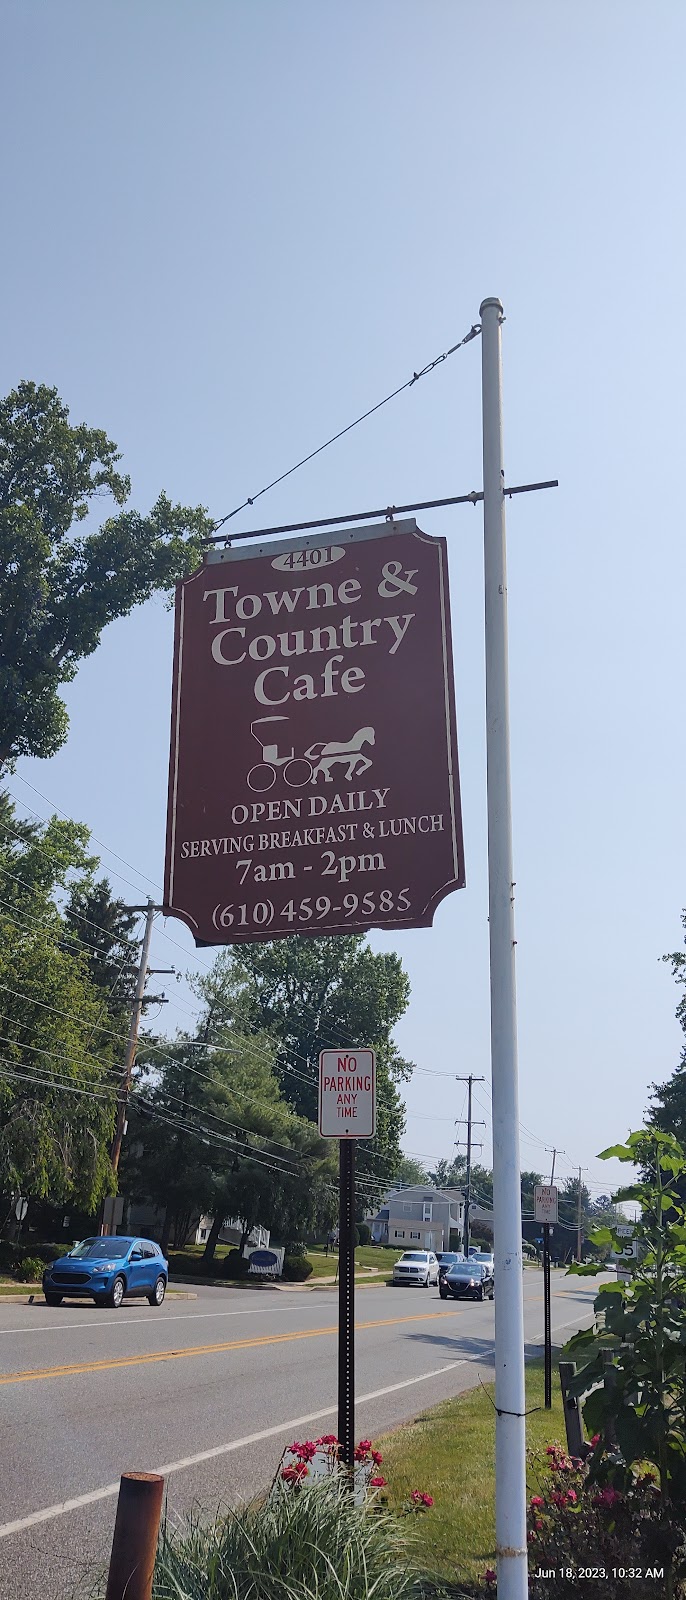 Towne & Country Cafe | 4401 Concord Rd, Aston, PA 19014 | Phone: (610) 459-9585